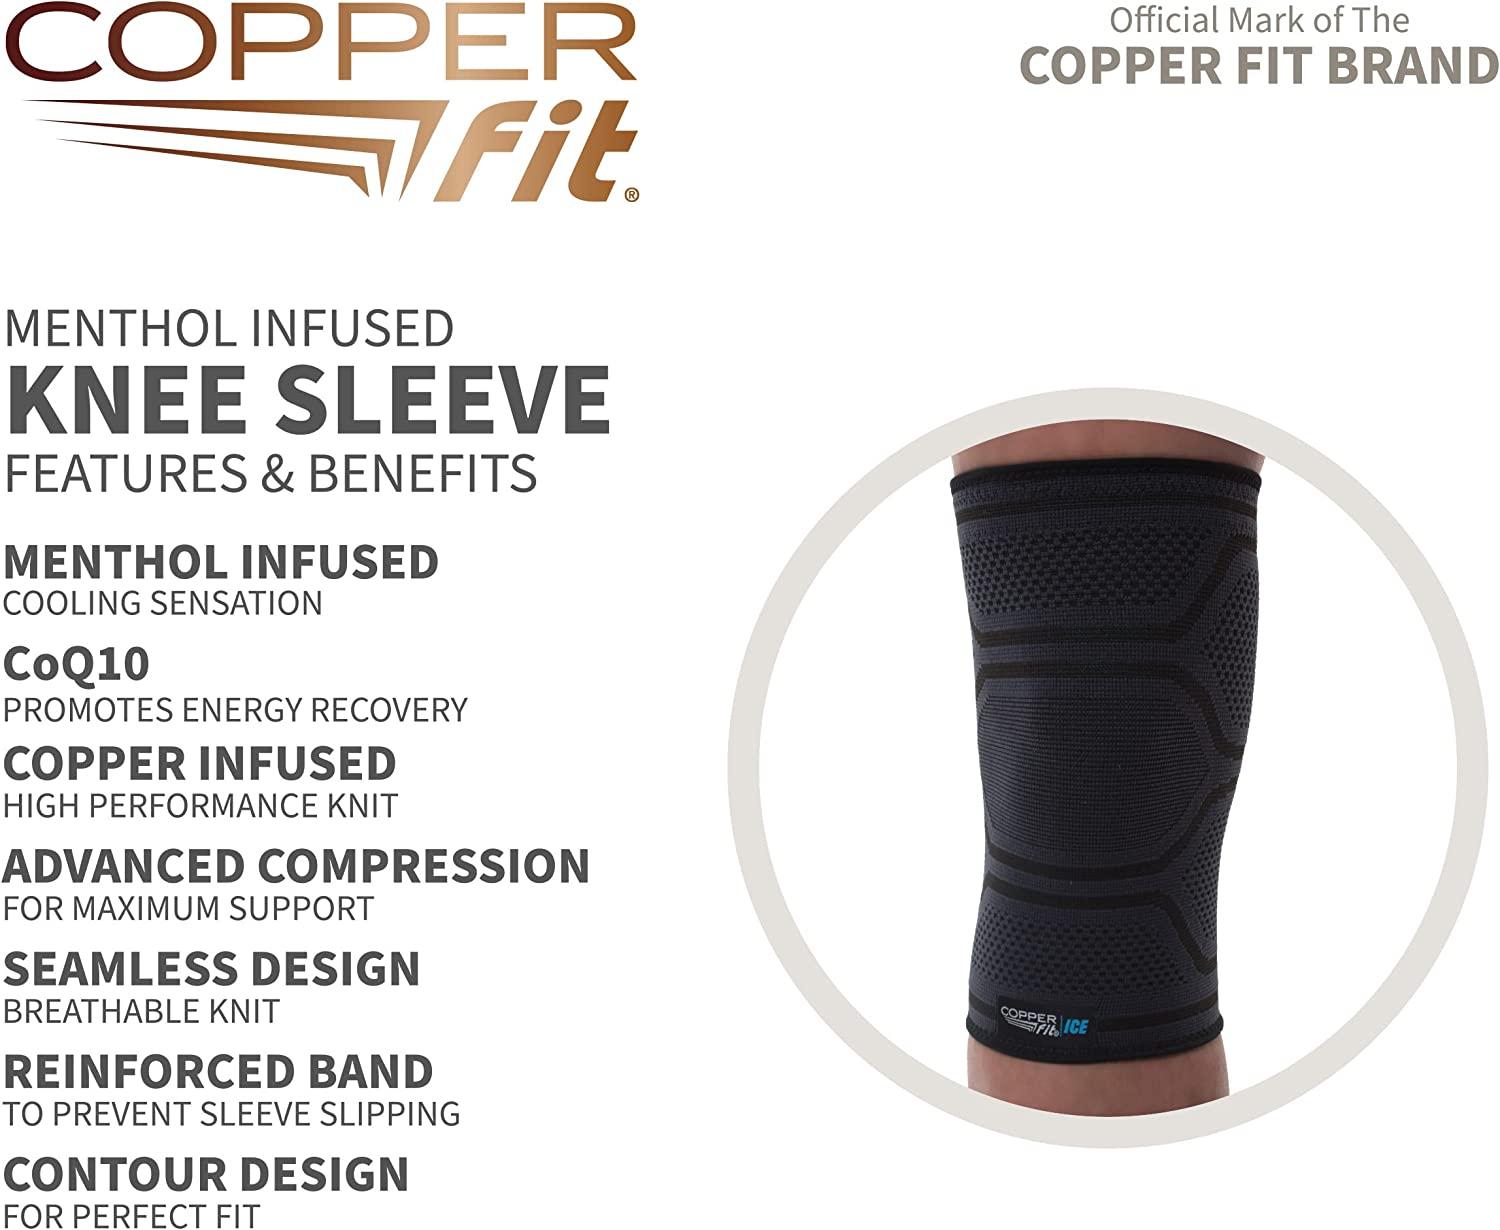 Copper Fit ICE Knee Compression Sleeve Infused with Menthol and